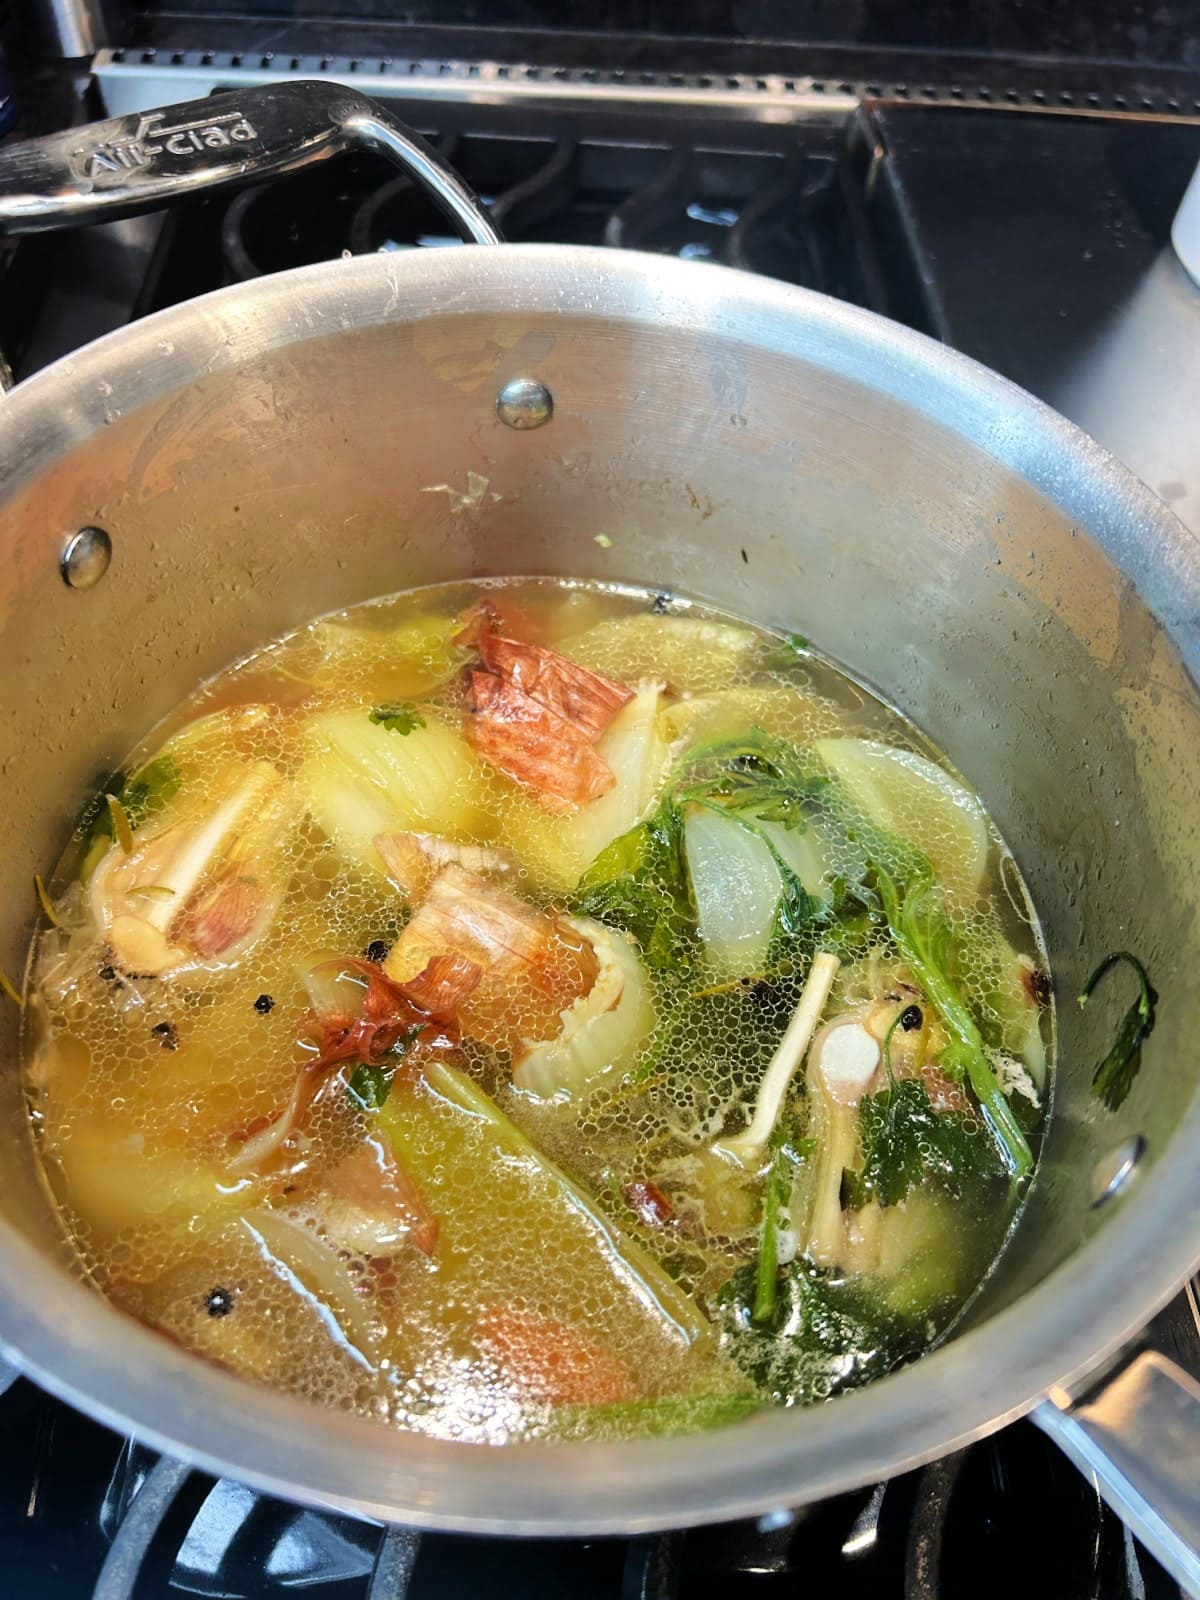 Chicken thighs and broth simmering in a saucepan